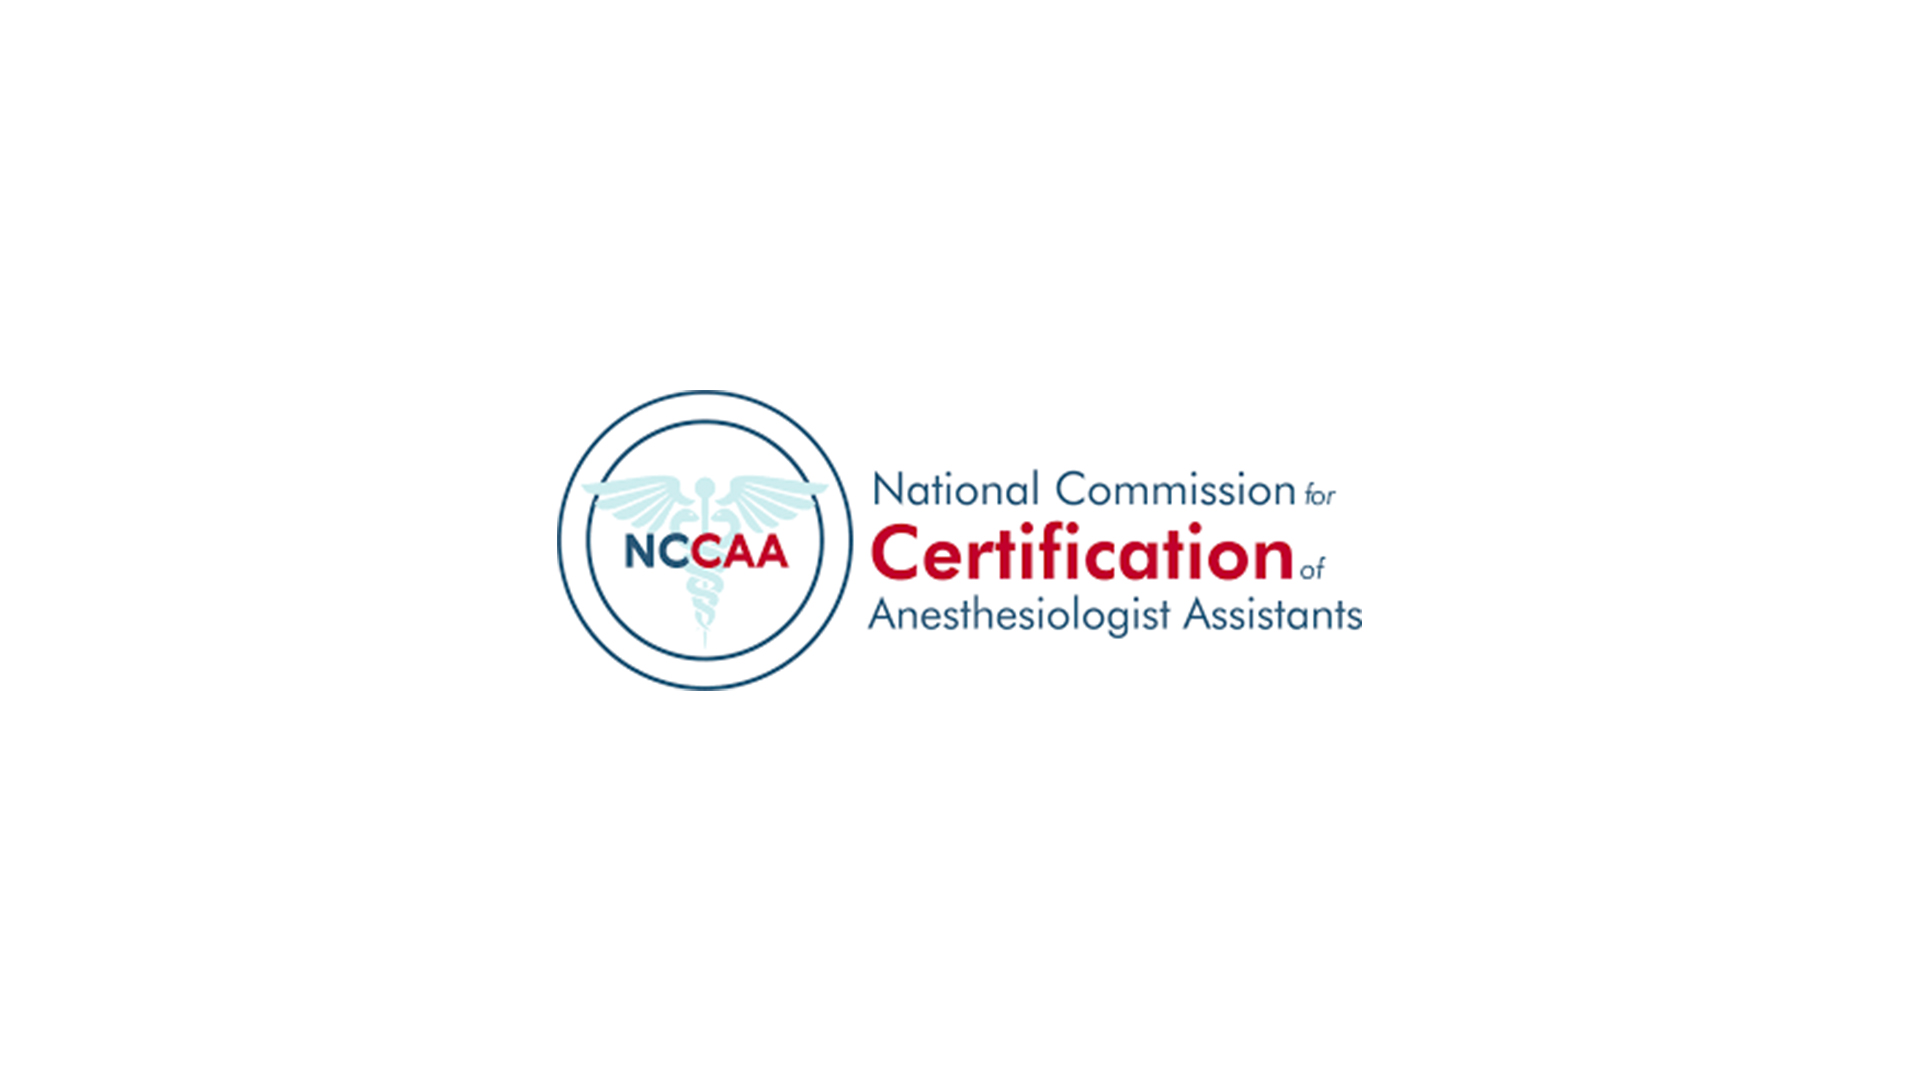 National Commission for Certification of Anesthesiologist Assistants (NCCAA)